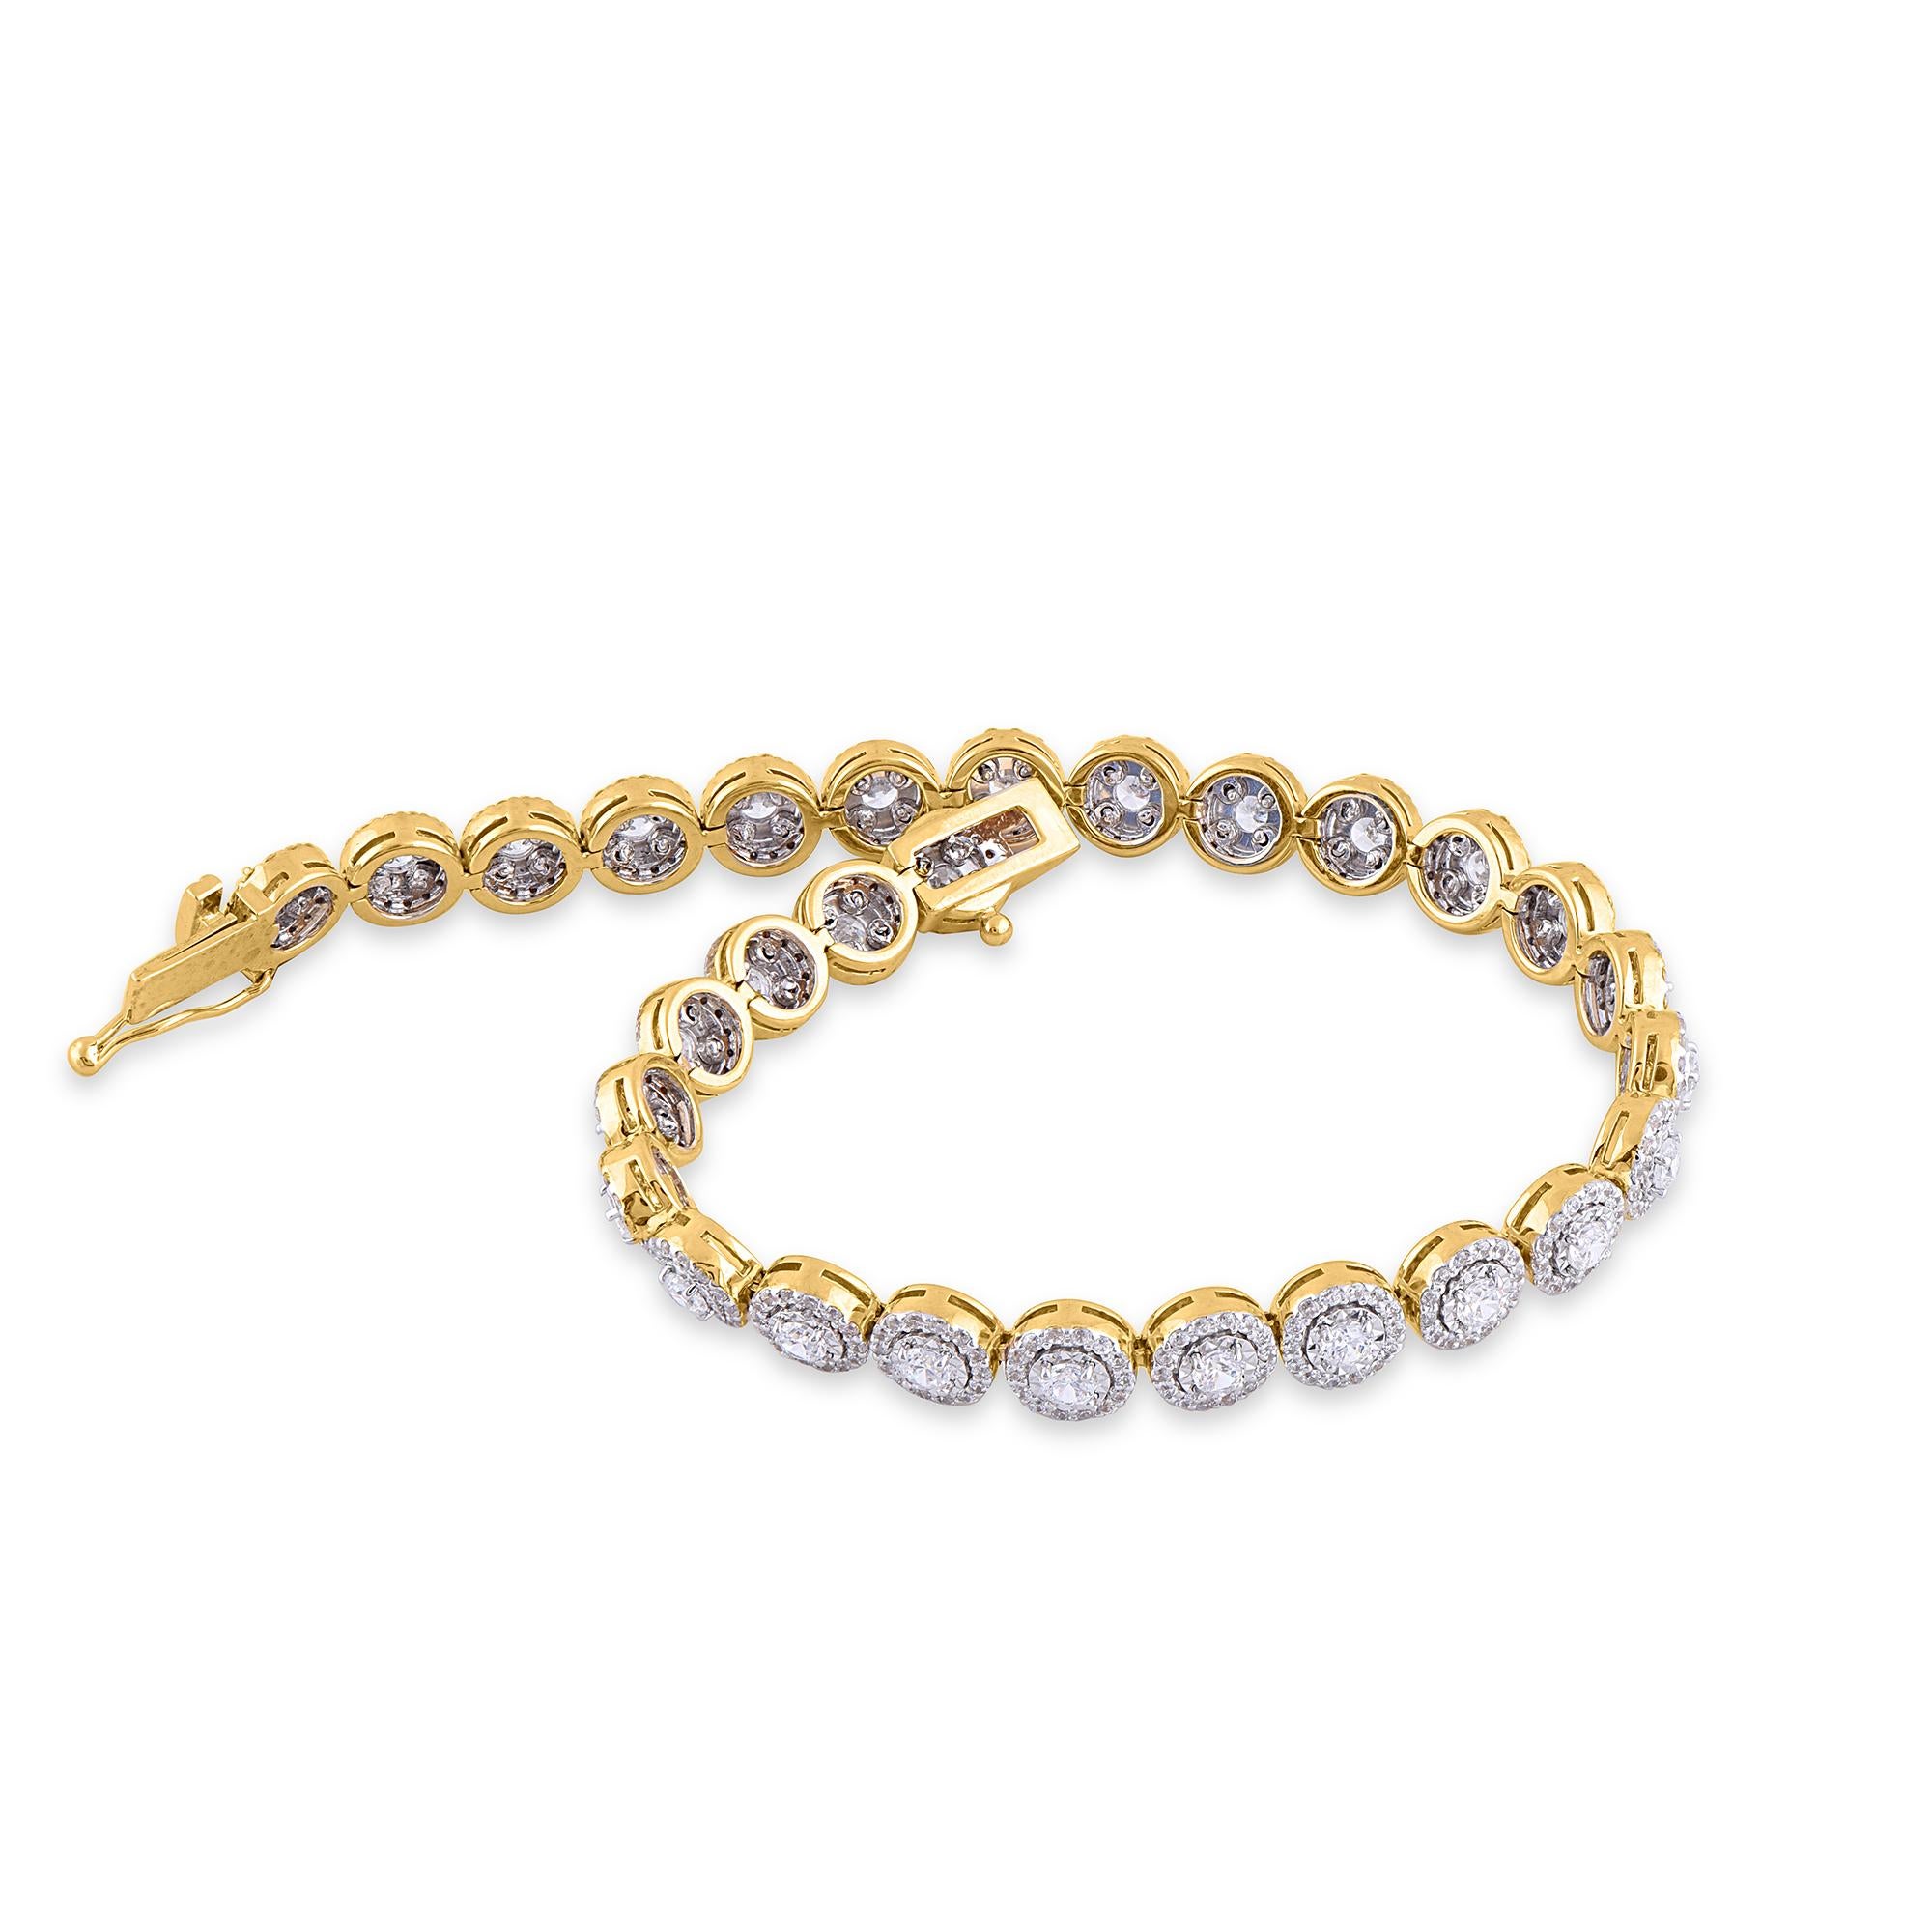 Simply stunning, this diamond tennis bracelet adds easy elegance to your casual or dressy attire. Crafted in cool 14 Karat yellow gold and embellished with 435 round brilliant-cut natural diamond in prong setting. The total diamond weight is 4.00